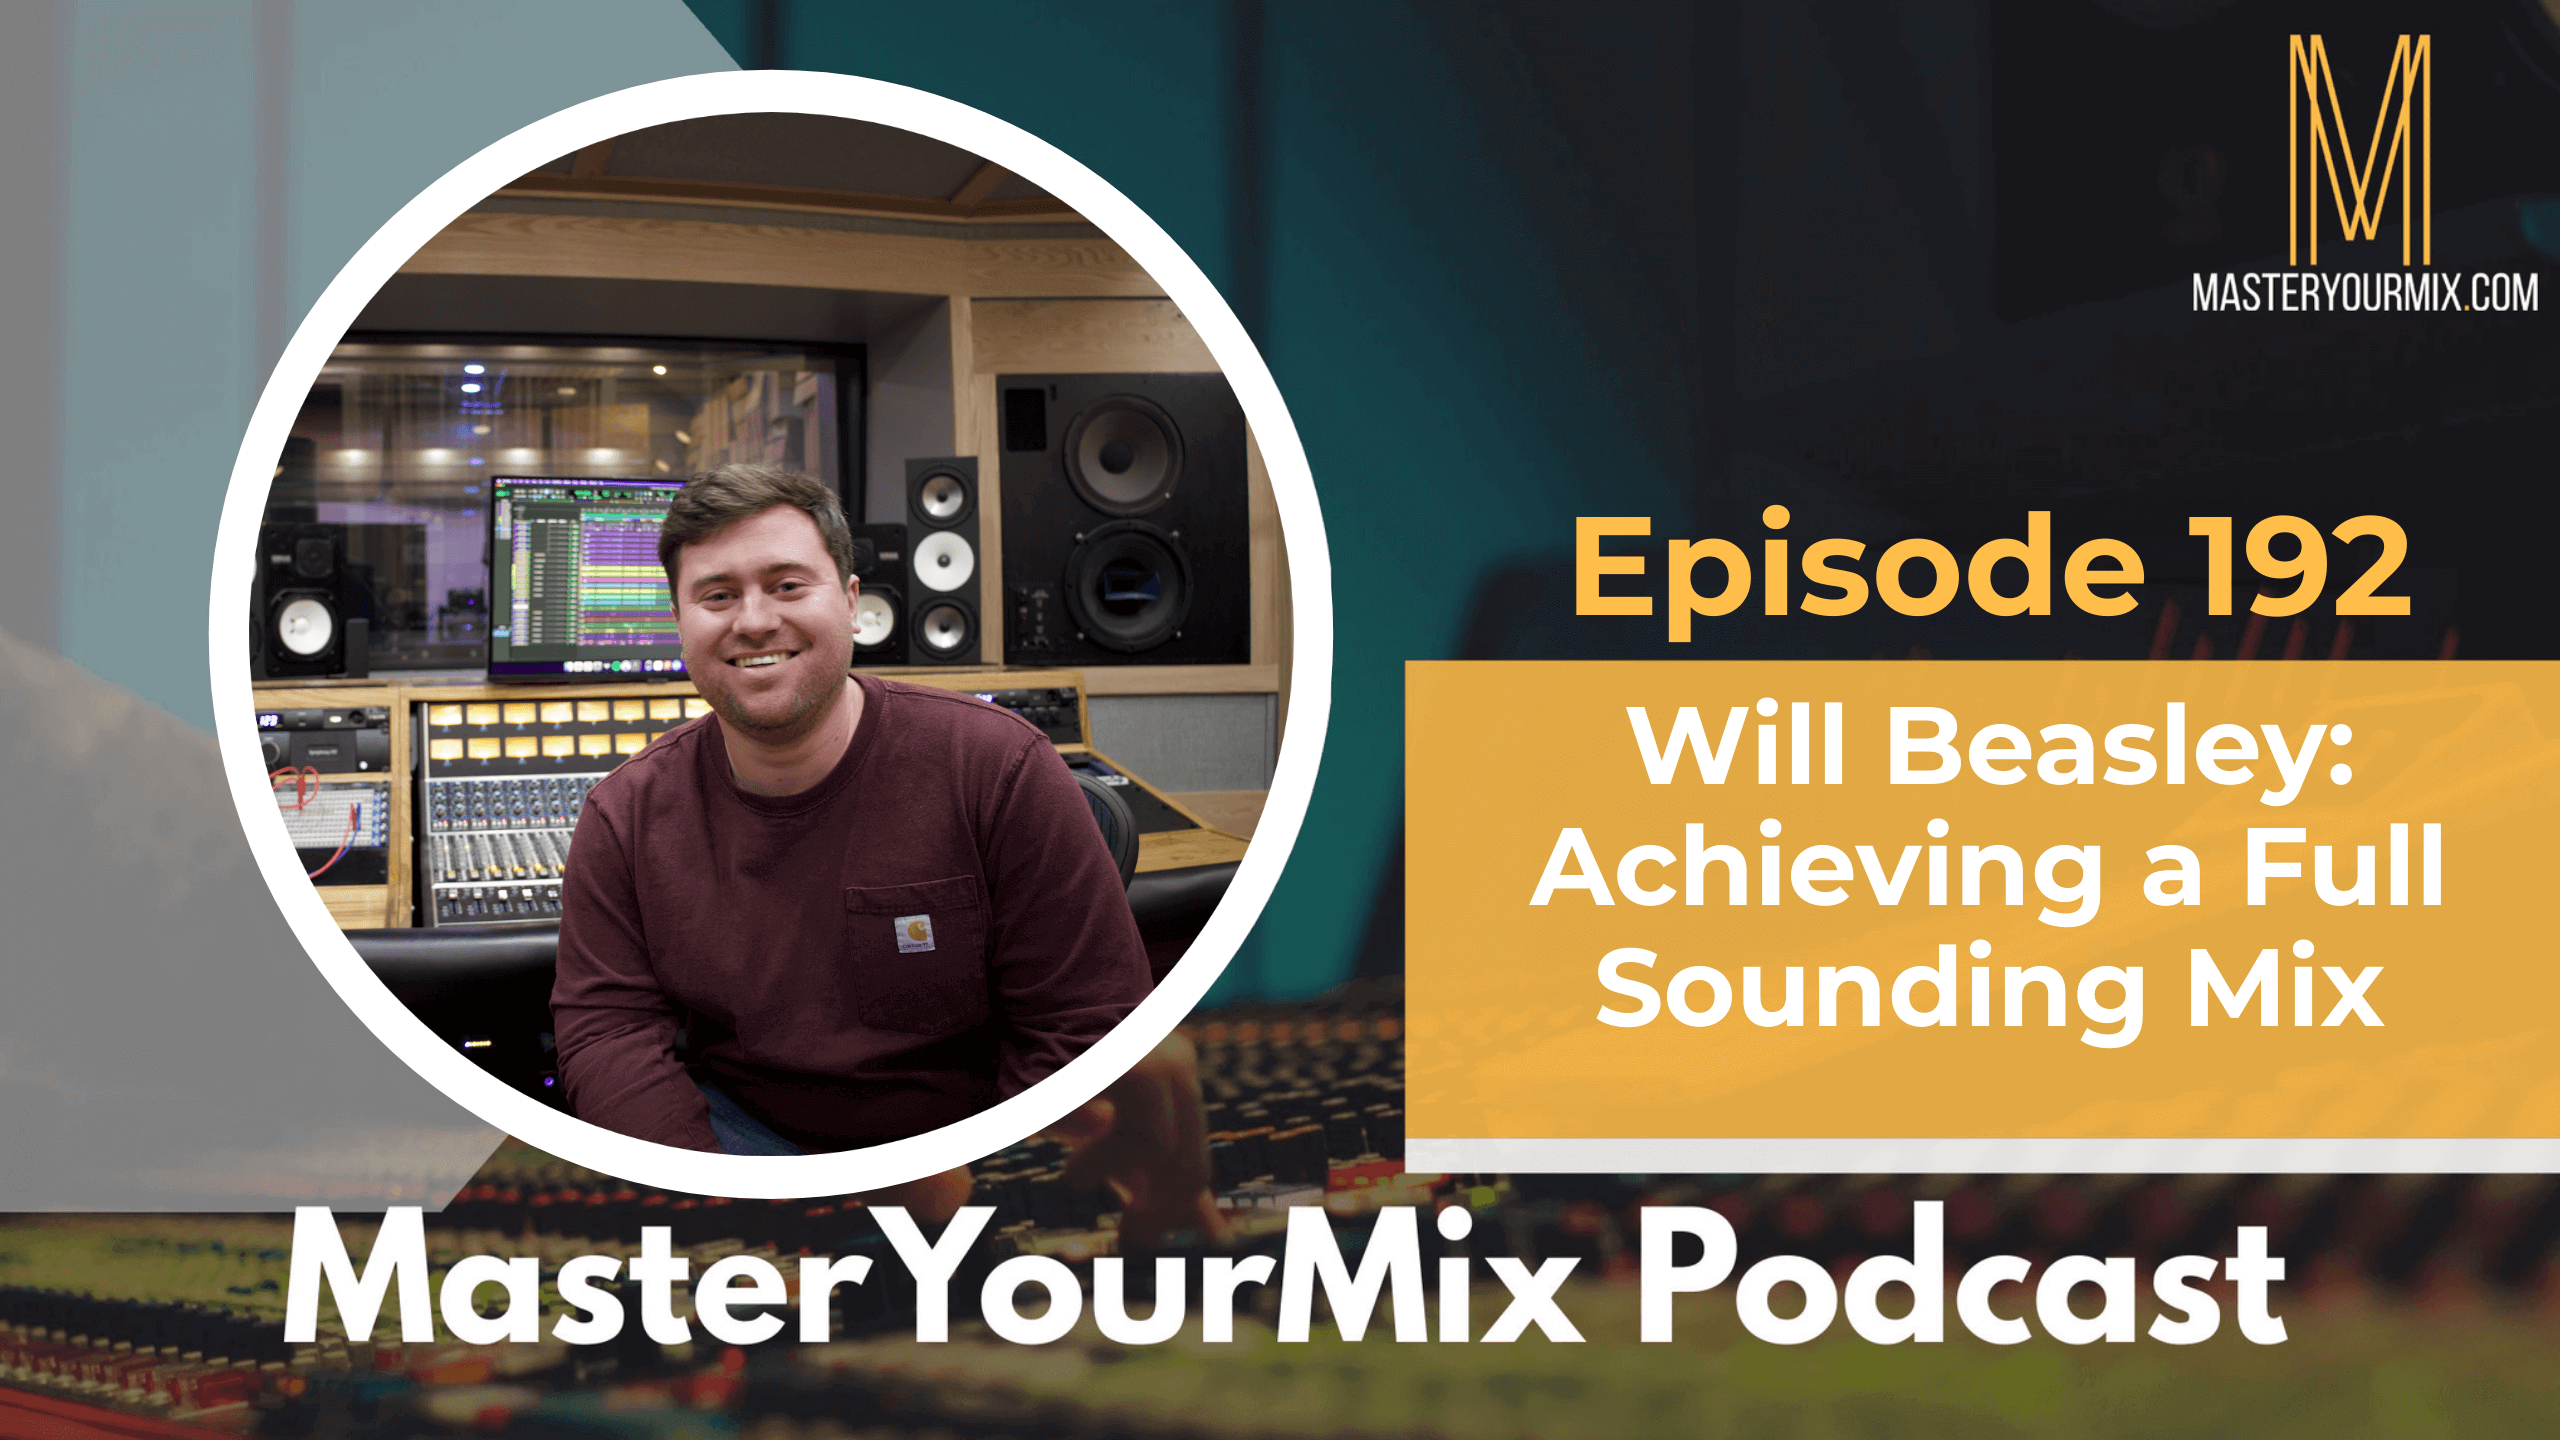 master your mix podcast, ep 192 will beasley